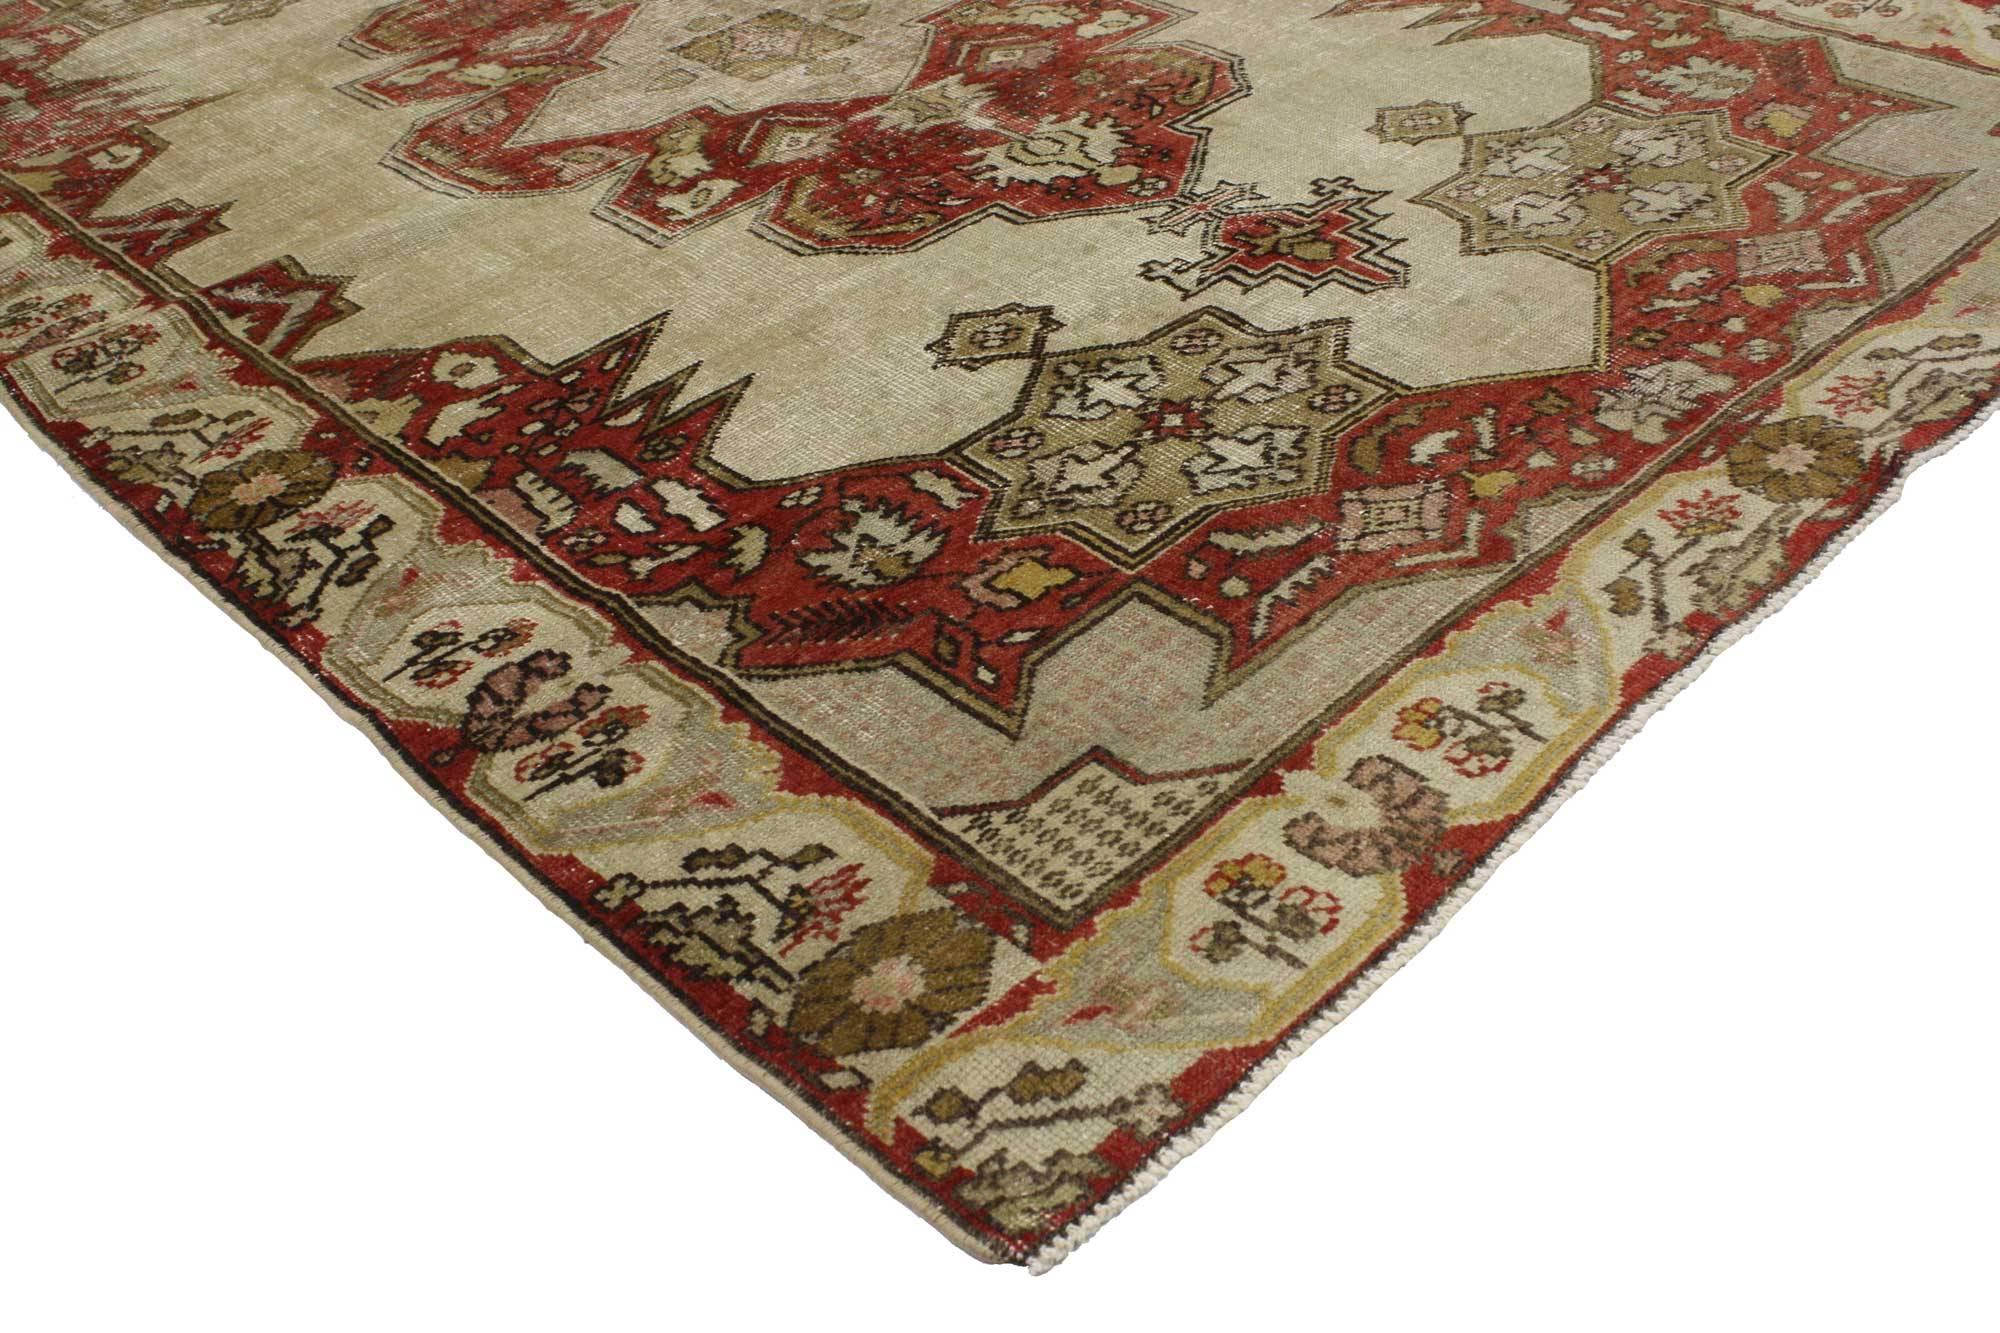 51707 Distressed Vintage Turkish Oushak Rug with Art Deco Aristocrat Style 04'08 x 06'11. This hand knotted wool distressed vintage Turkish Oushak rug features a cusped centre medallion with palmette finials floating in an abrashed cut-out field.